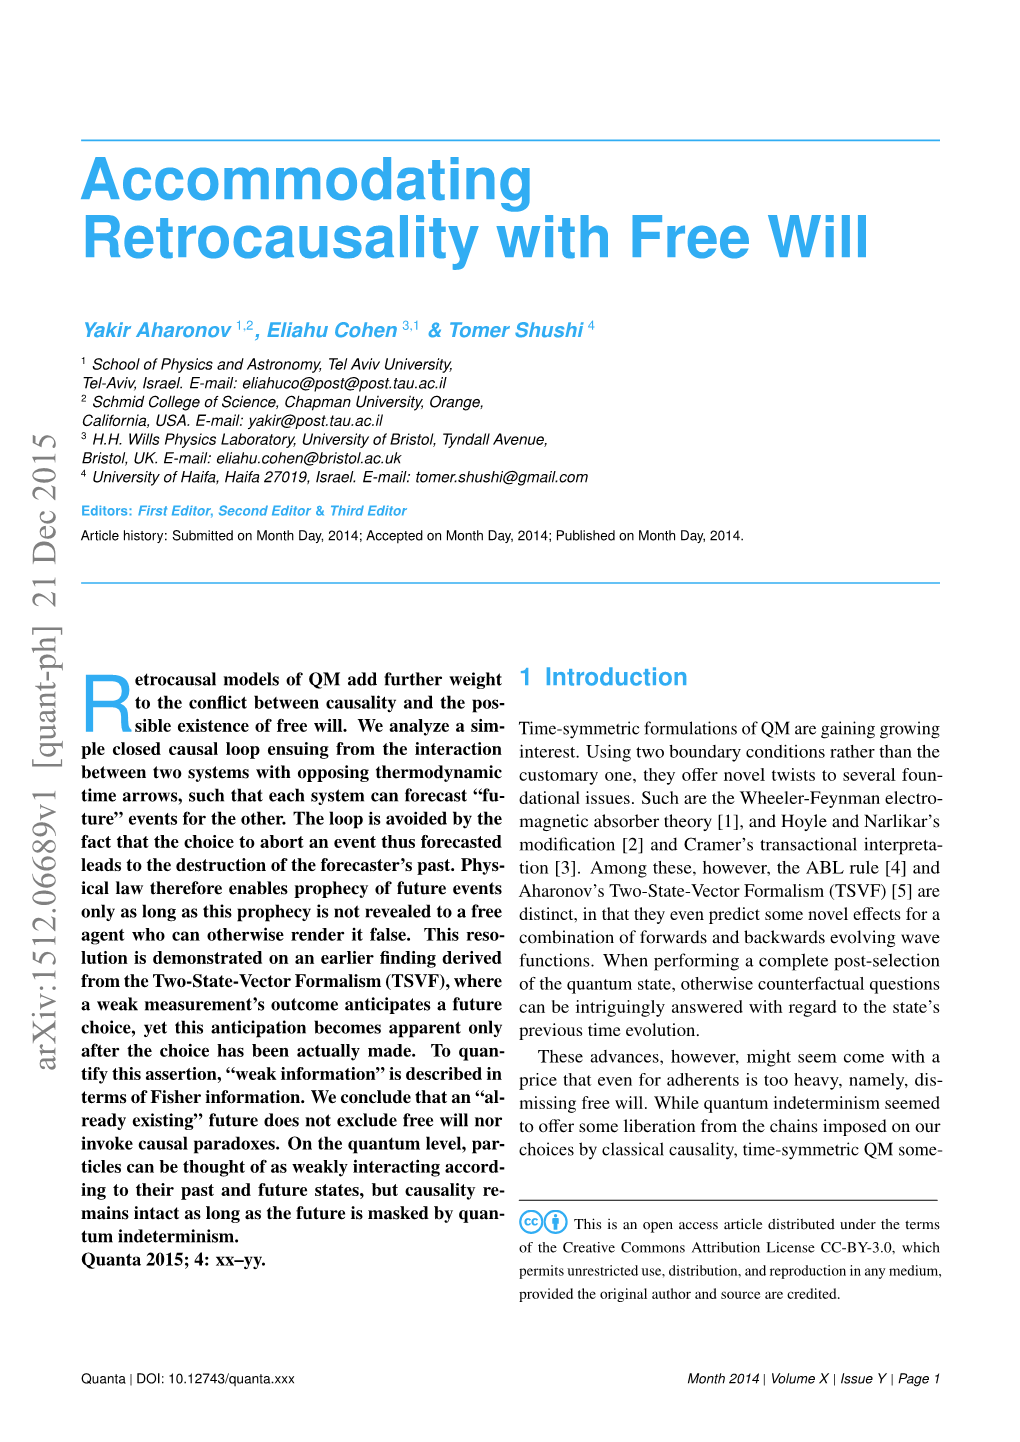 Accommodating Retrocausality with Free Will